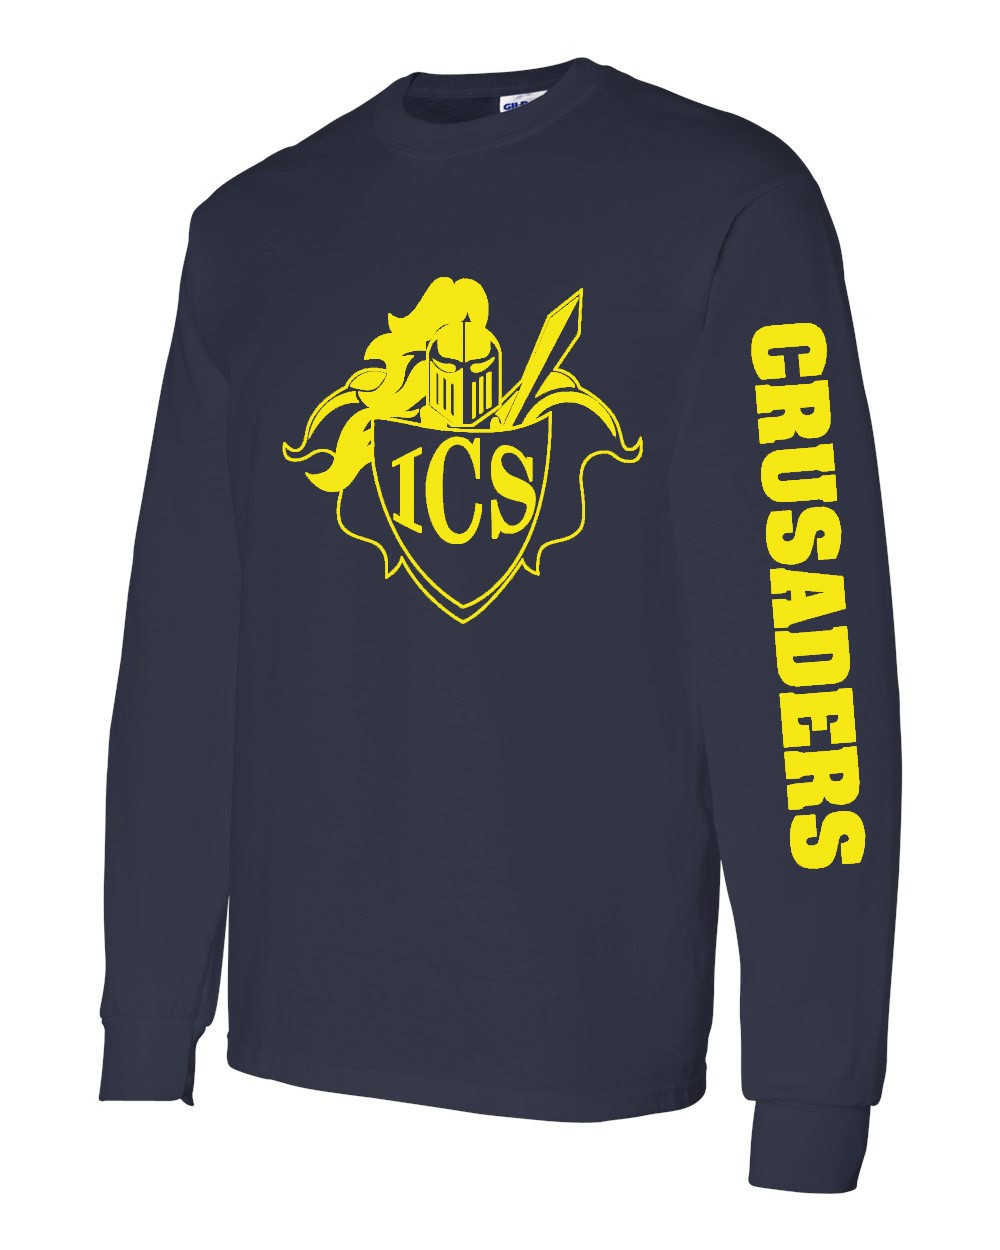 ICS Spirit L/S T-Shirt w/ Yellow Logo - Please Allow 2-3 Weeks for Delivery